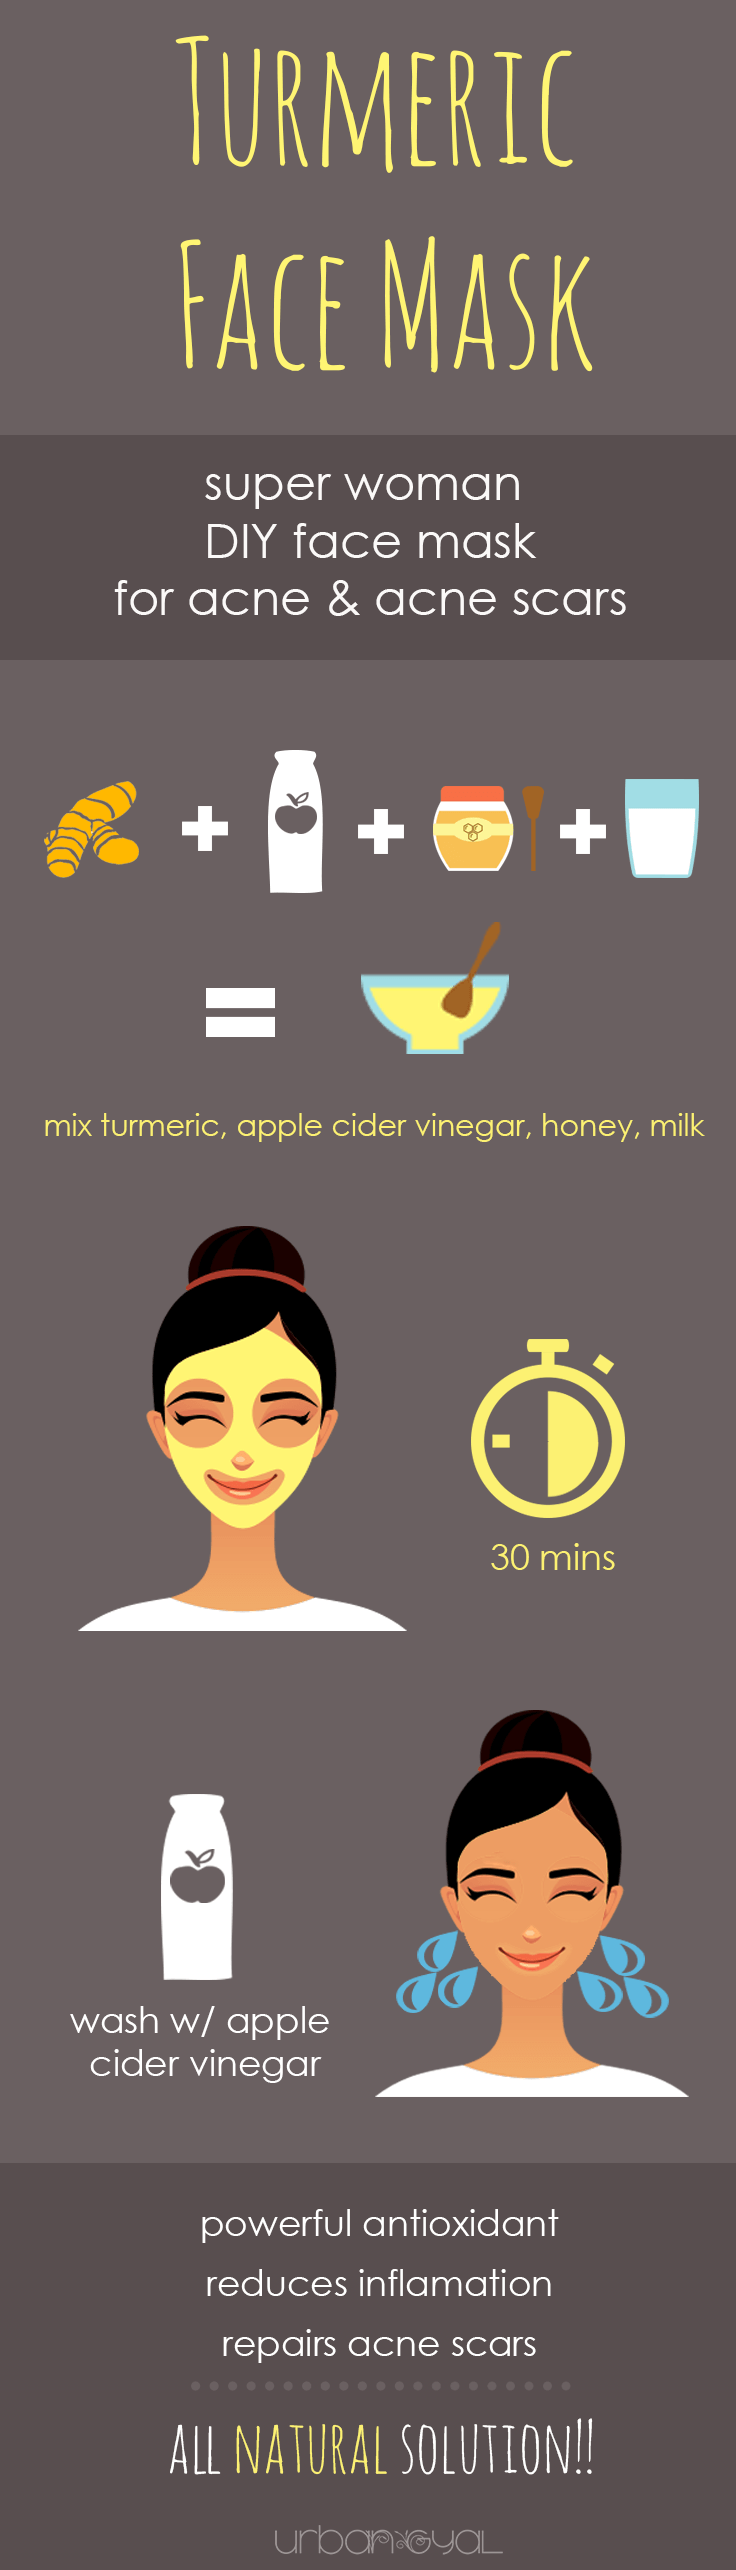 Turmeric Face Mask Infographic